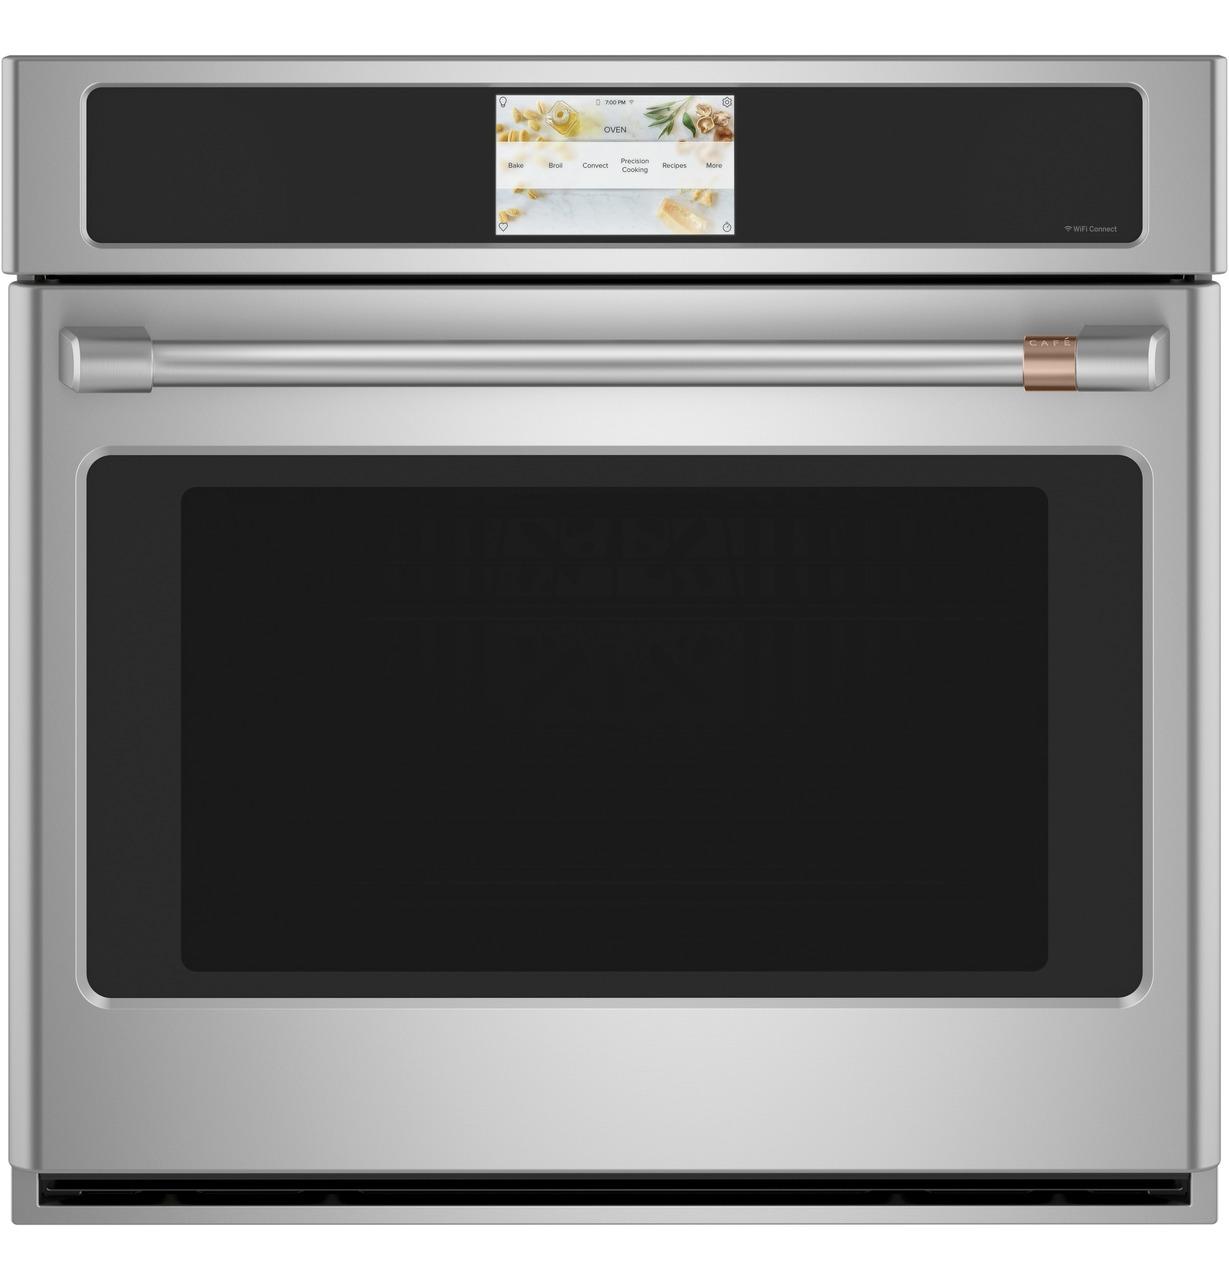 Cafe Caf(eback)™ 30" Smart Single Wall Oven with Convection